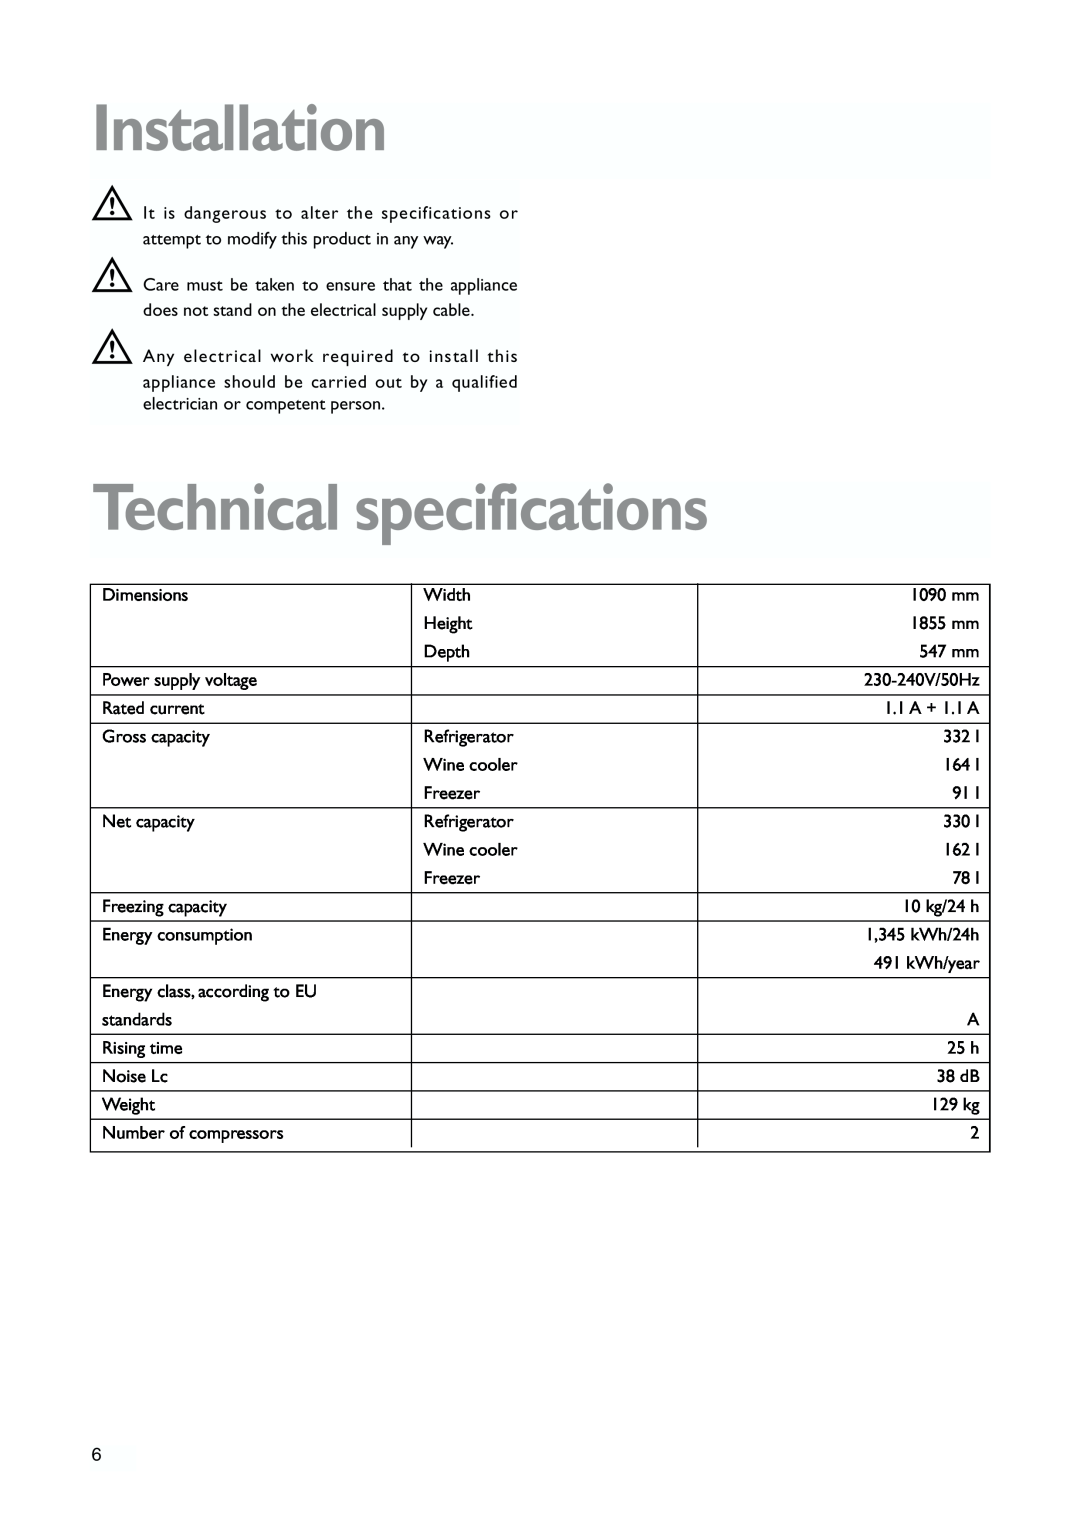 John Lewis JLWFF1101 instruction manual Installation, Technical specifications 